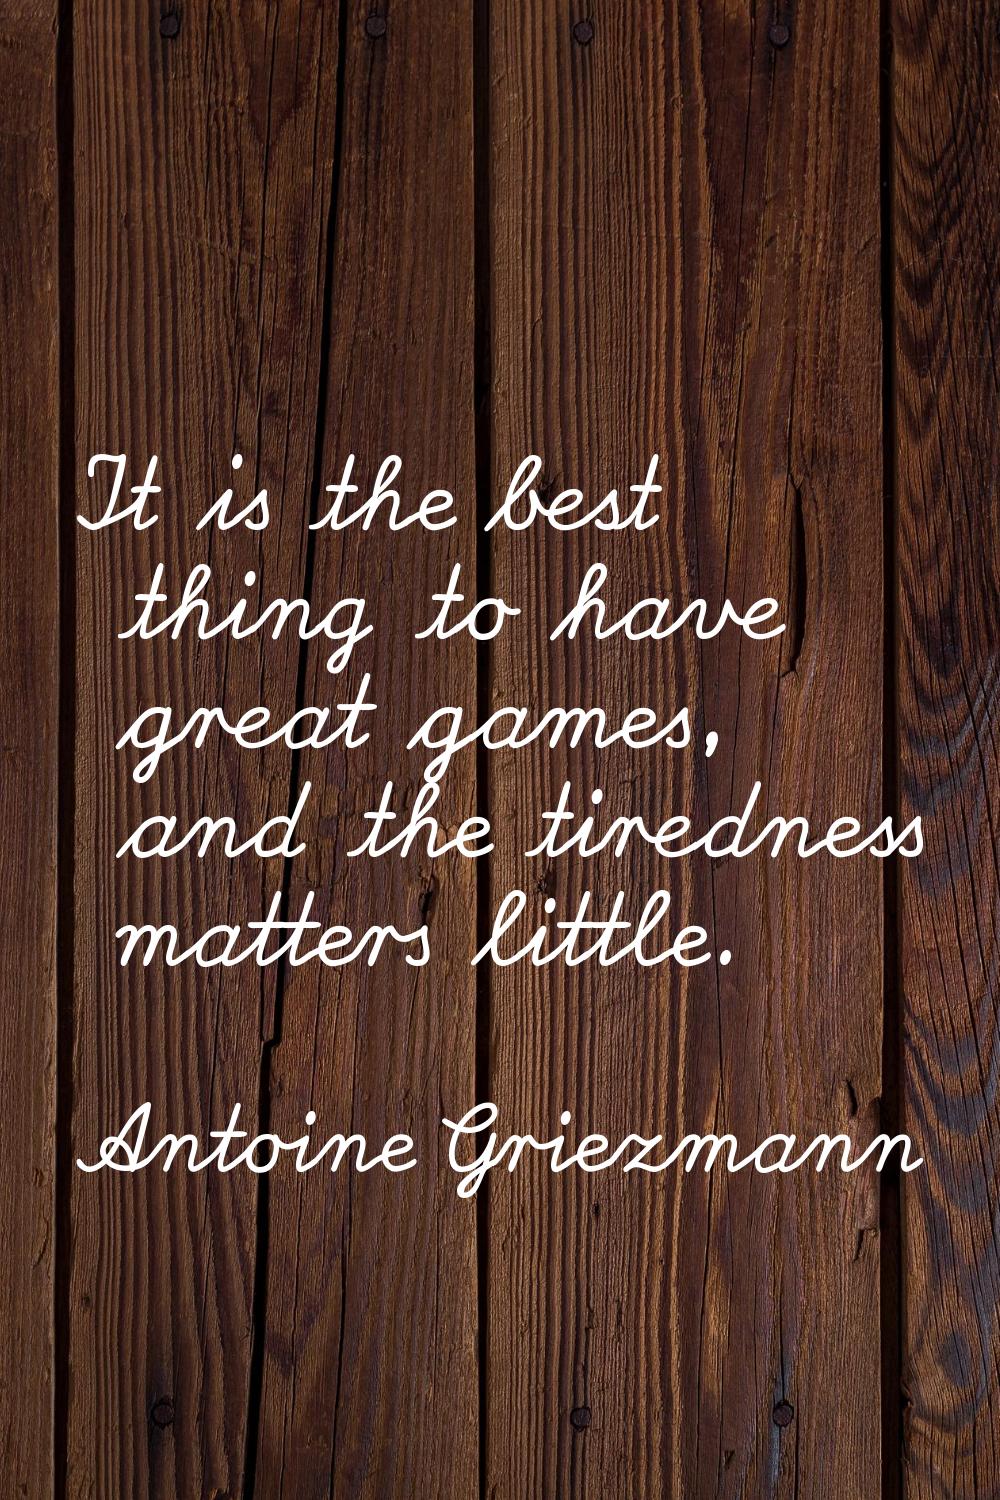 It is the best thing to have great games, and the tiredness matters little.